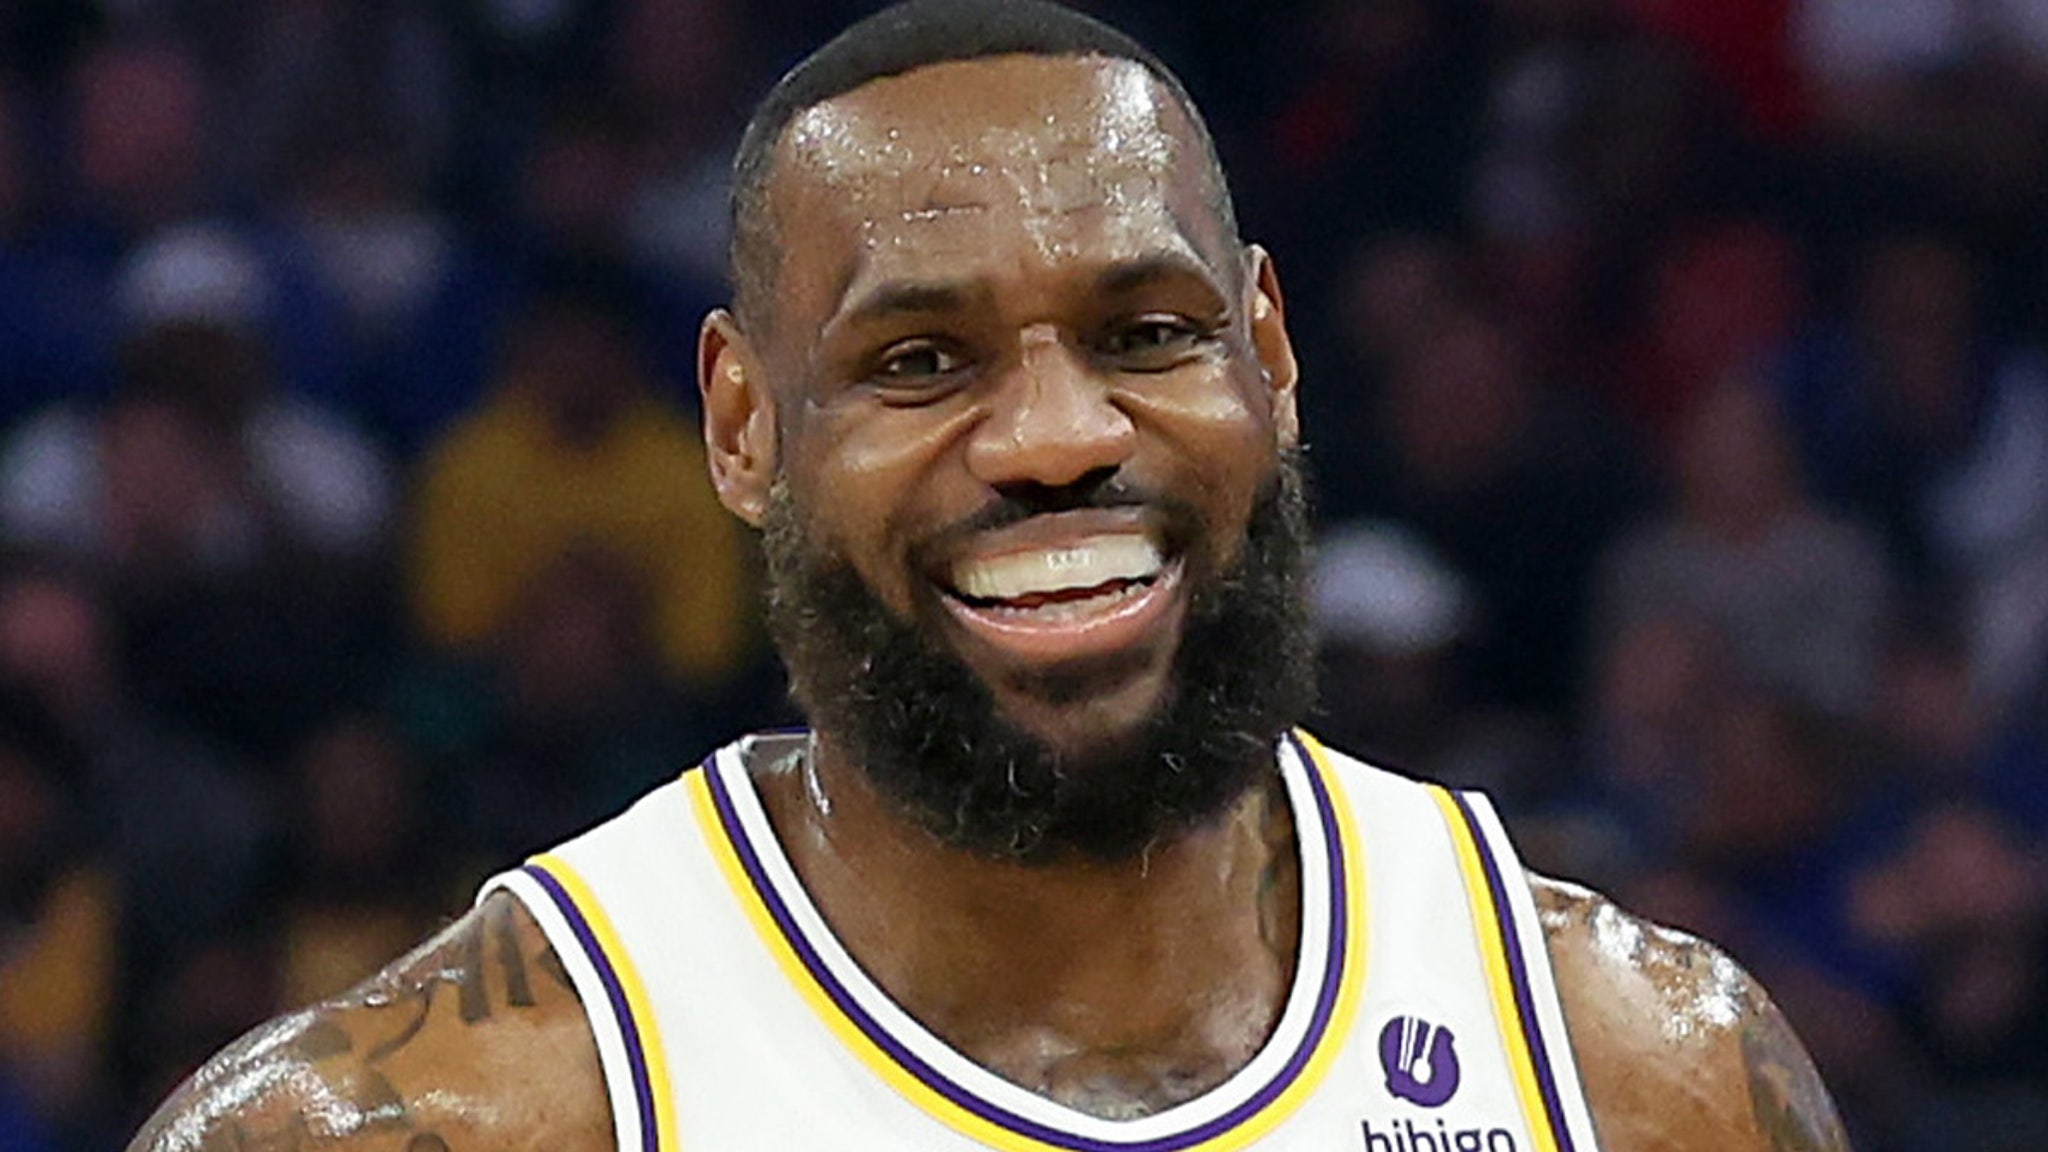 LeBron James Becomes First NBA Player Ever To Score 40,000 Points